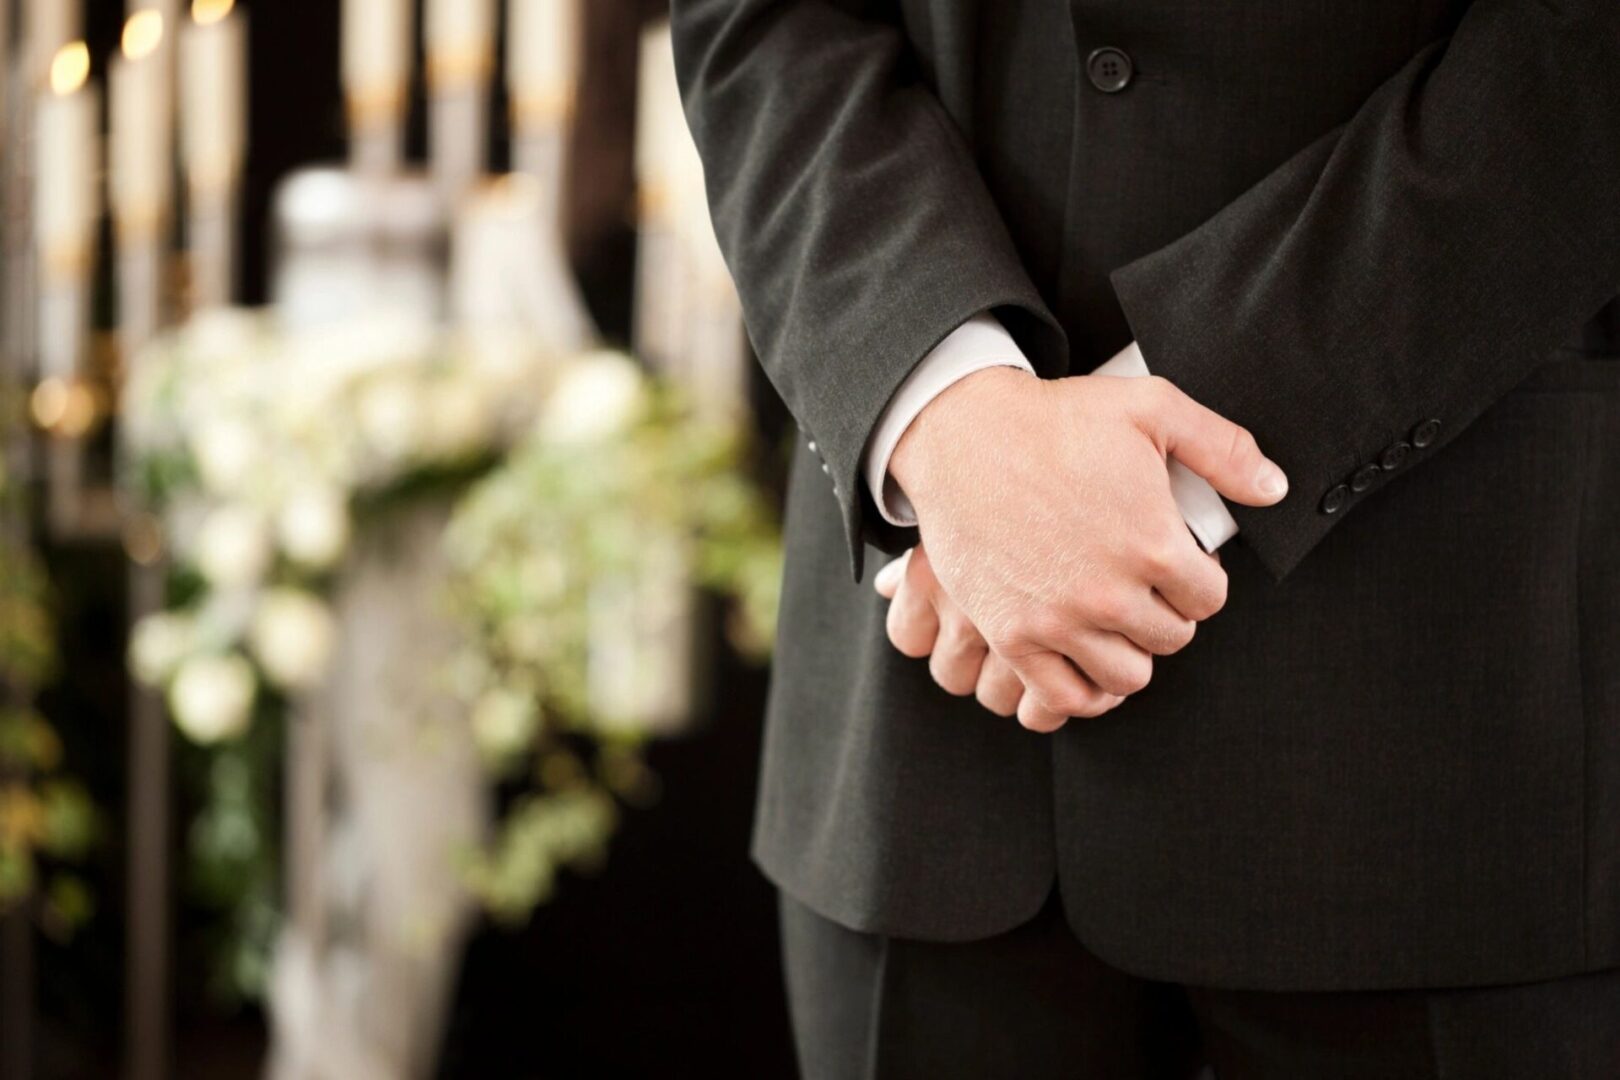 A man in black suit and white shirt holding hands.